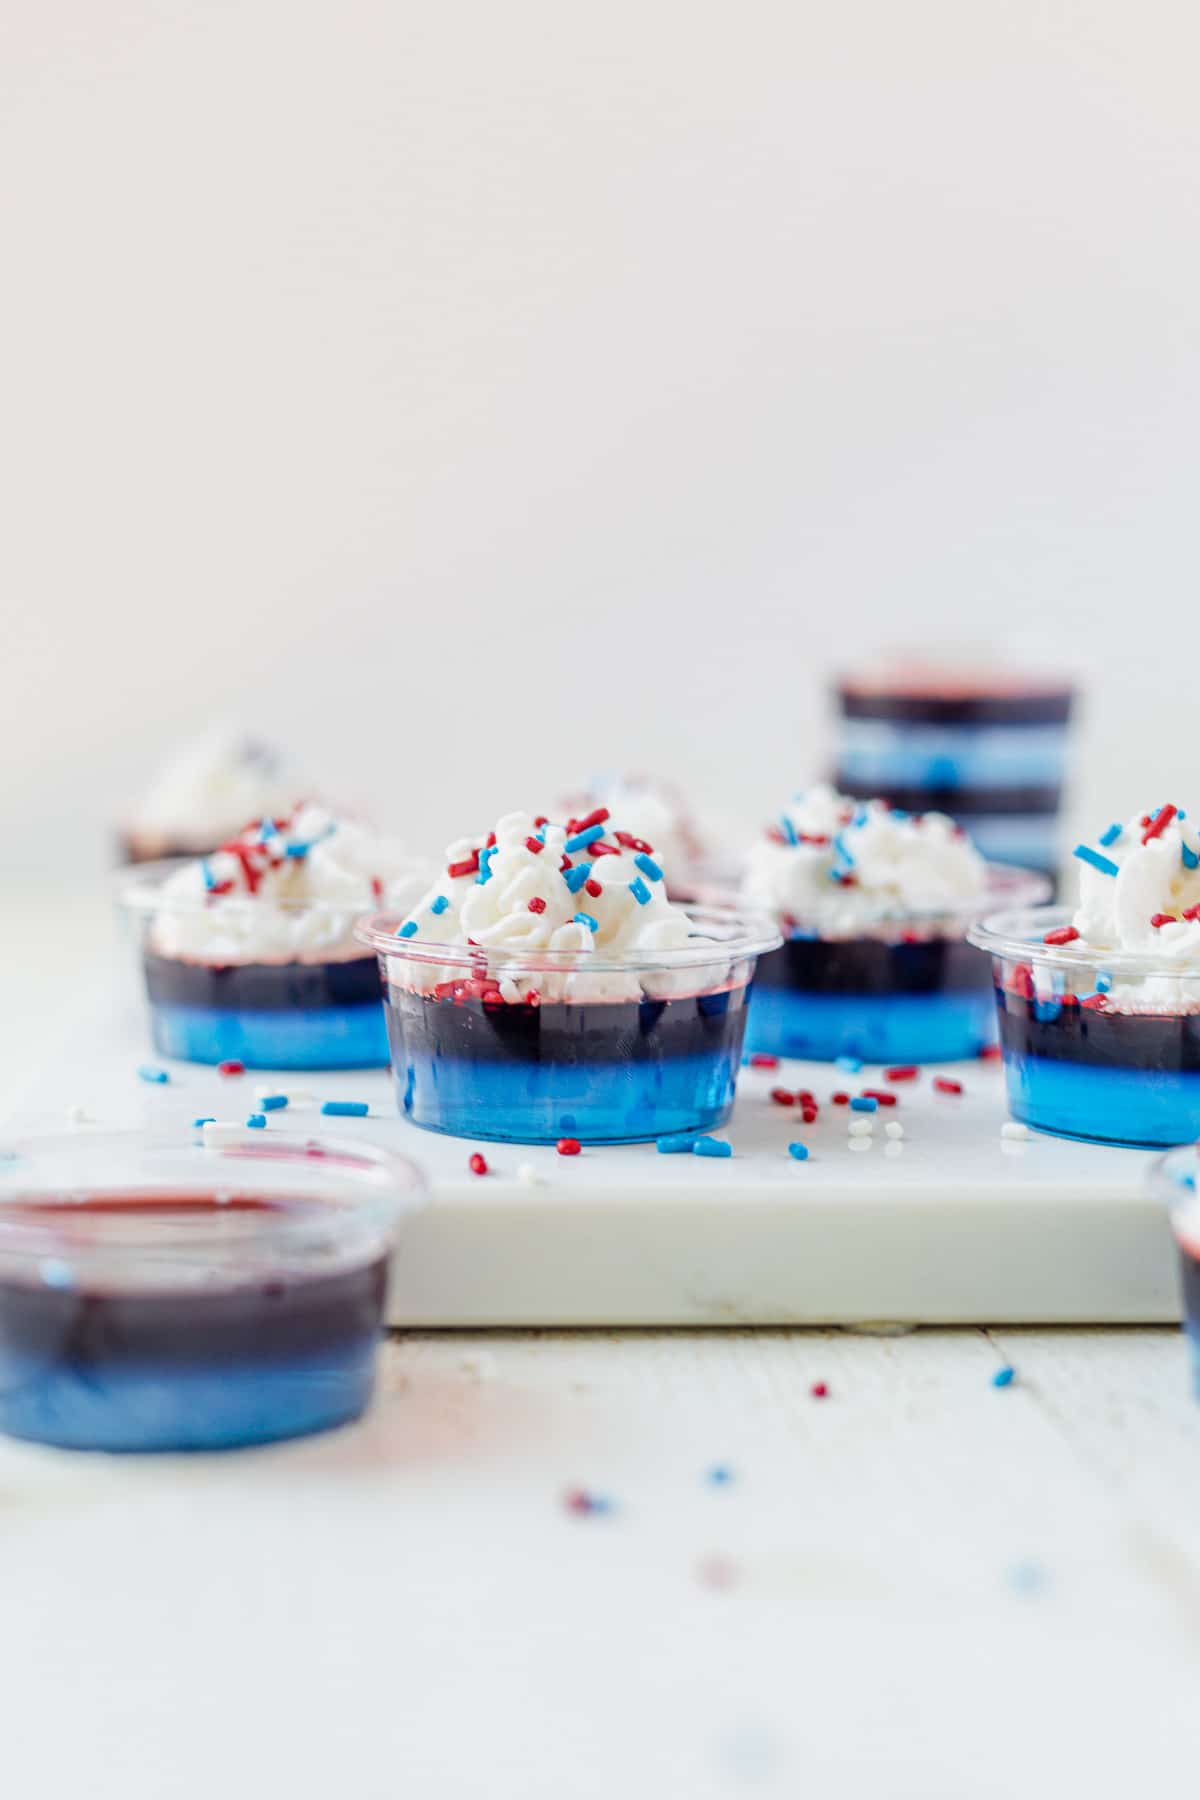 jello shots layered with blue and red jello then topped with whipped cream and sprinkles on a white serving tray